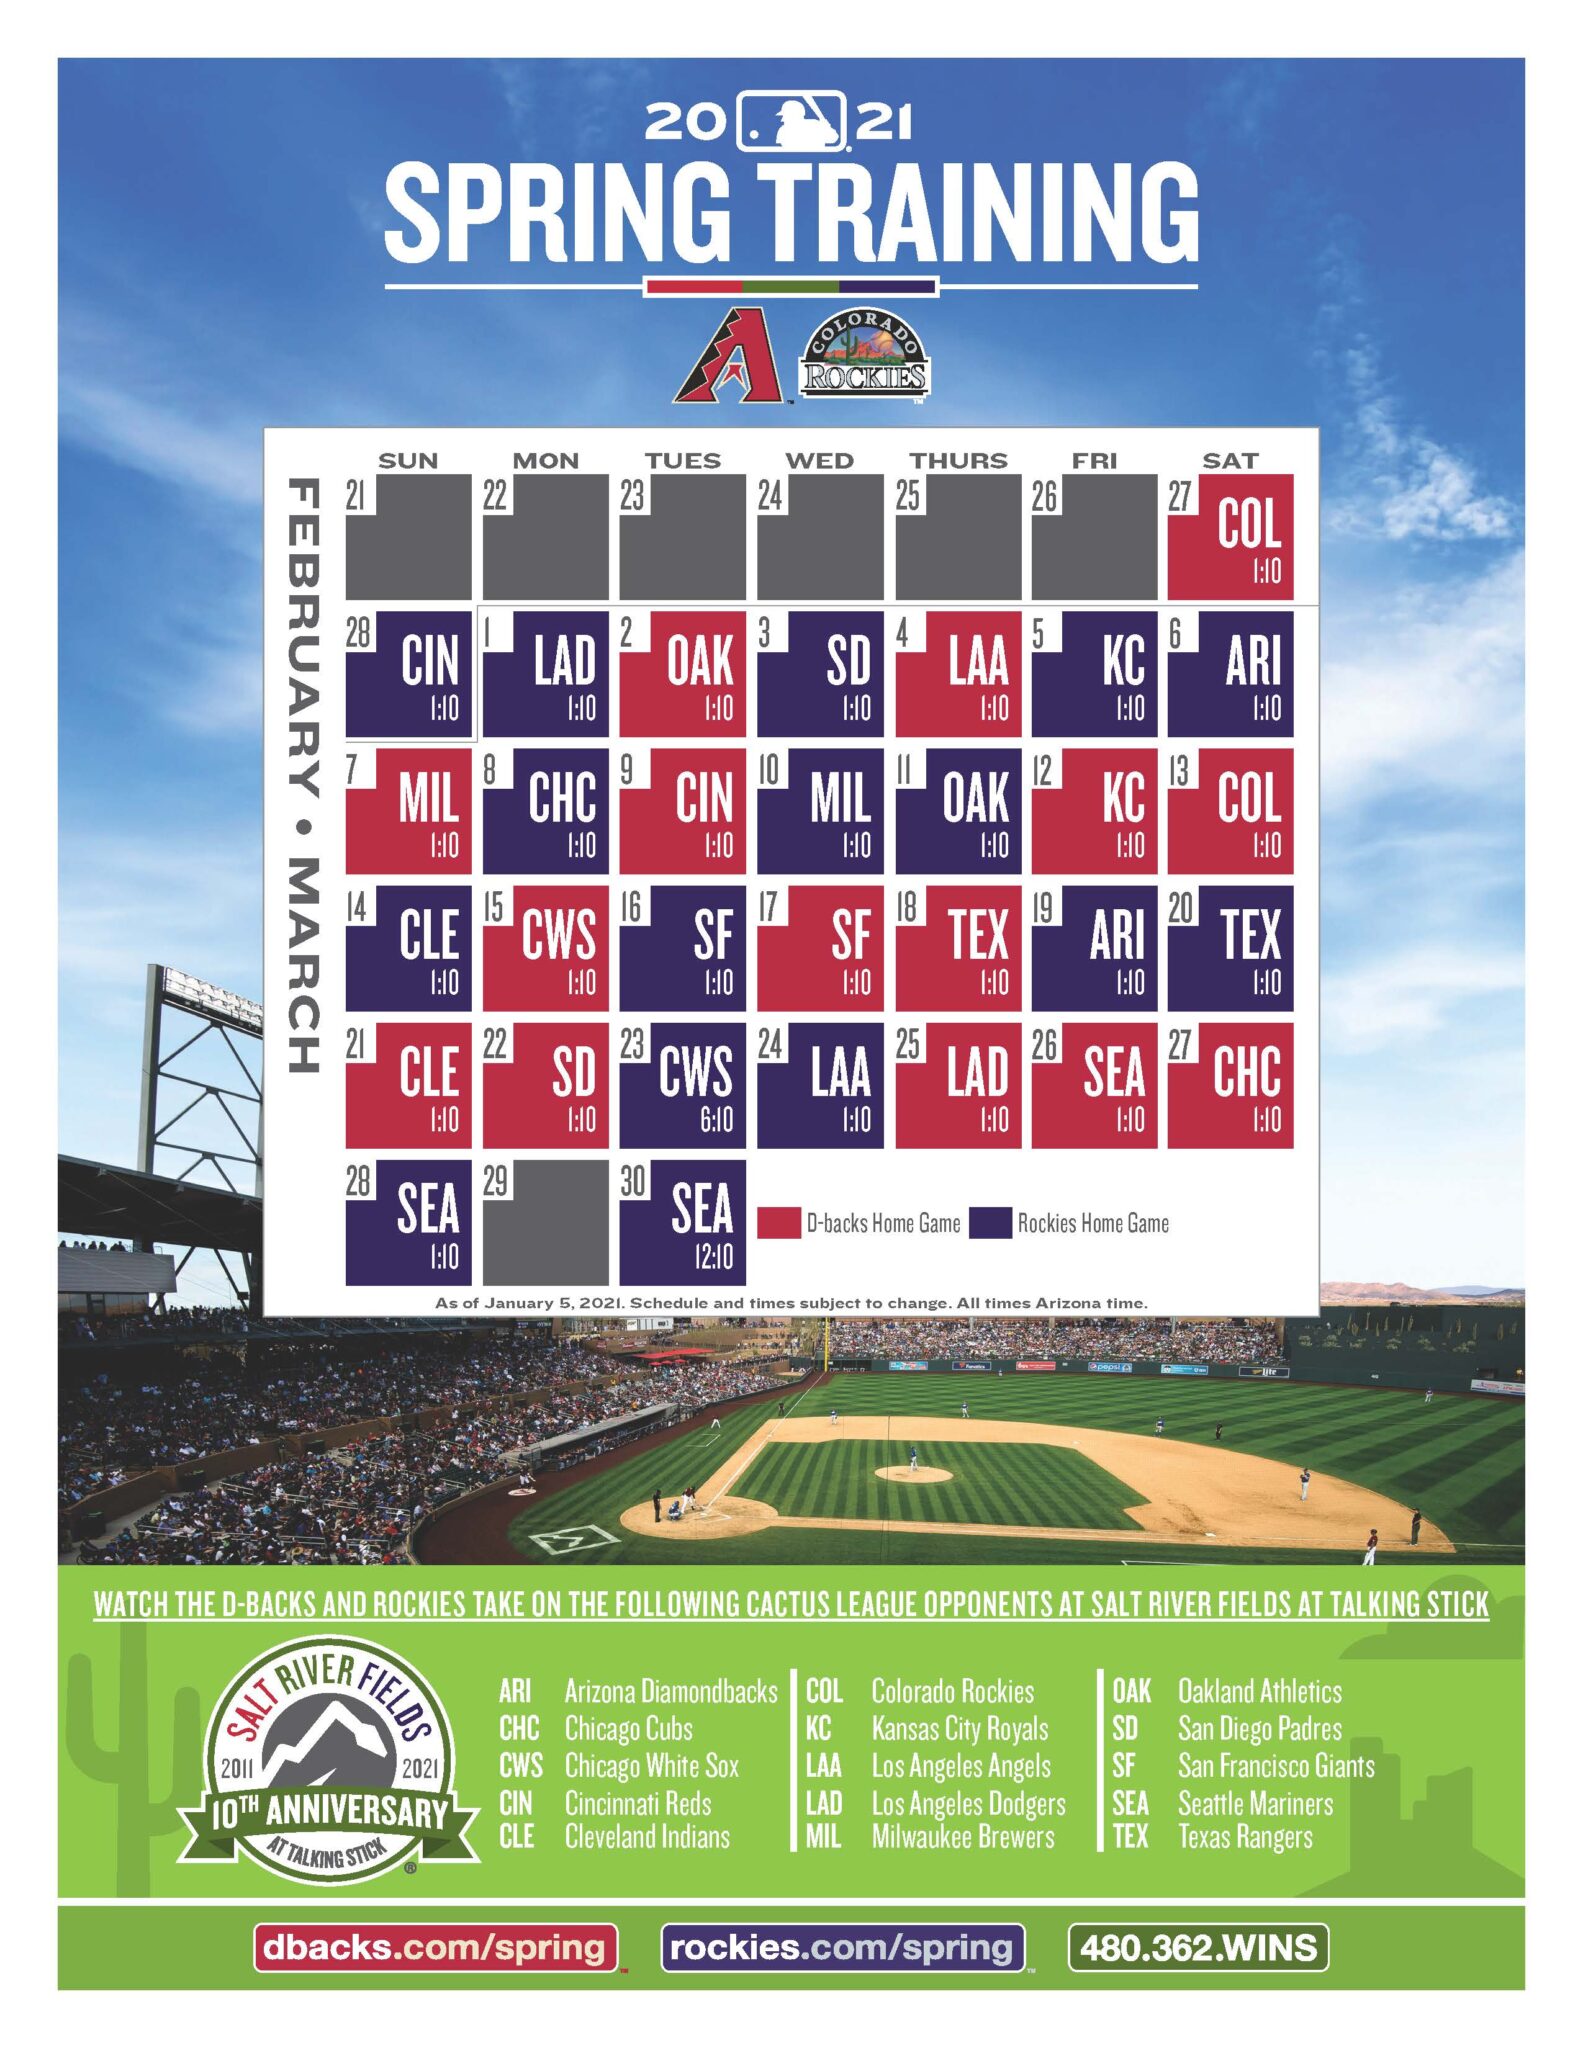 let-s-play-ball-spring-training-at-salt-river-fields-macaroni-kid-north-scottsdale-pv